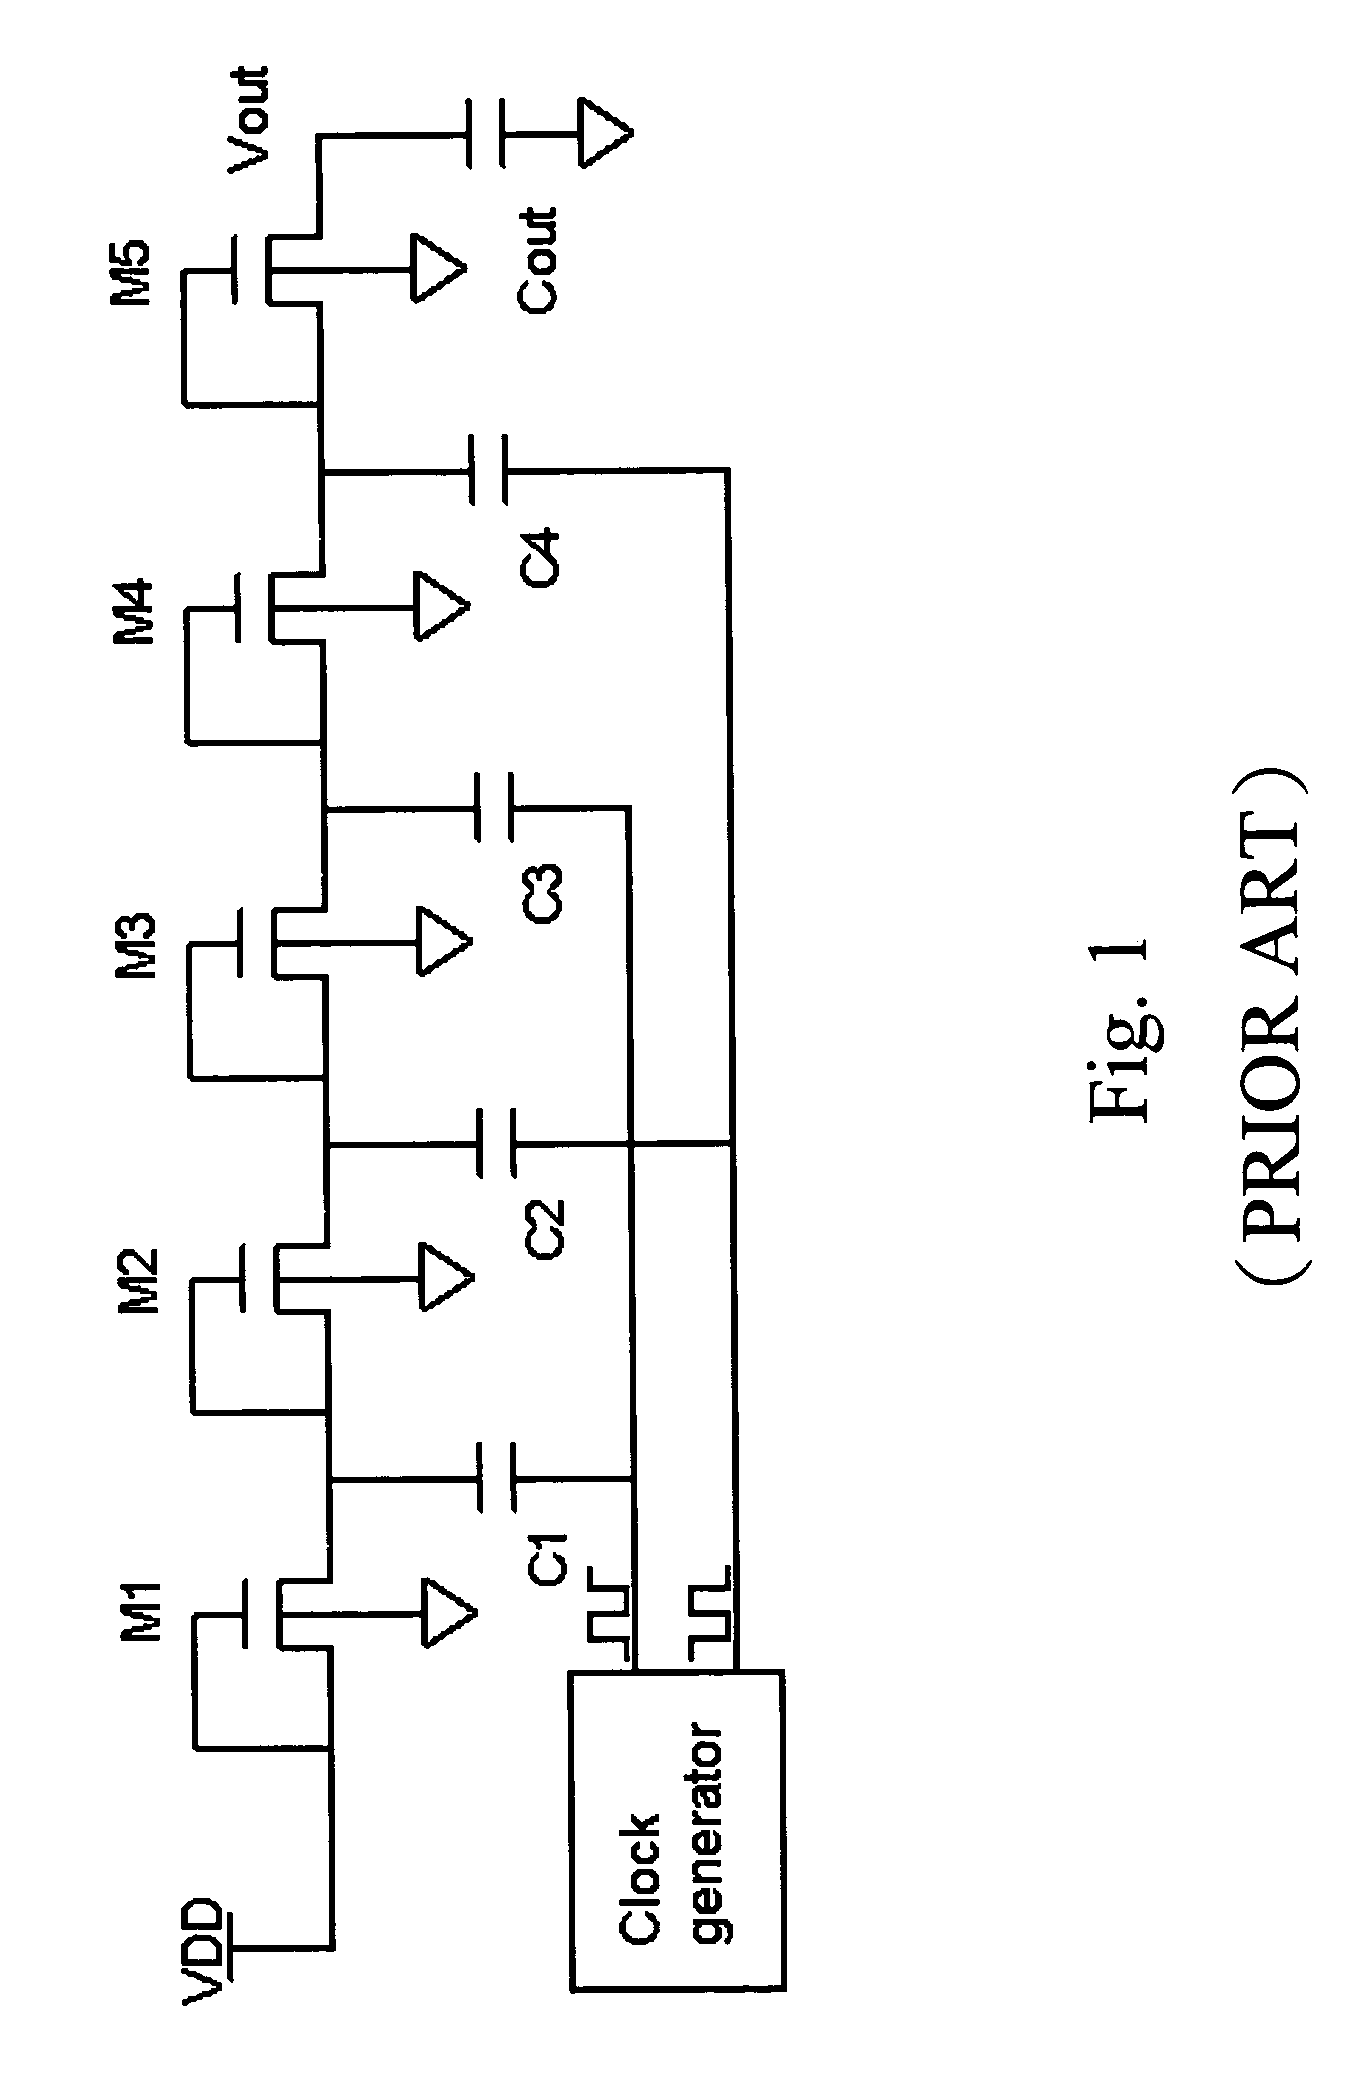 Charge pump circuit suitable for low-voltage process